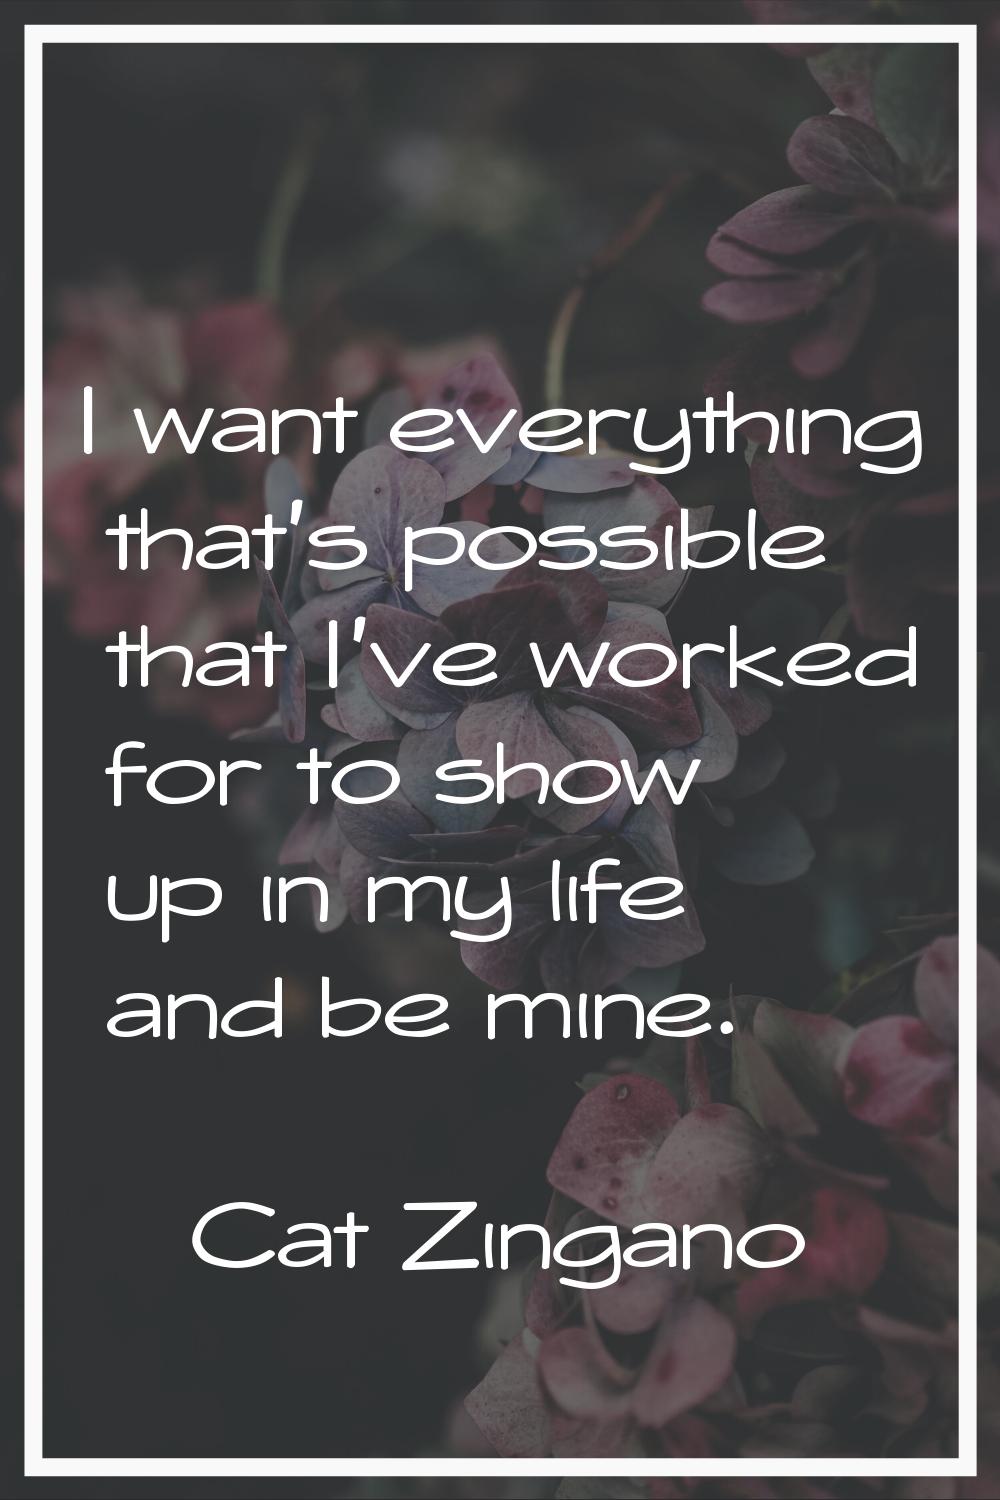 I want everything that's possible that I've worked for to show up in my life and be mine.